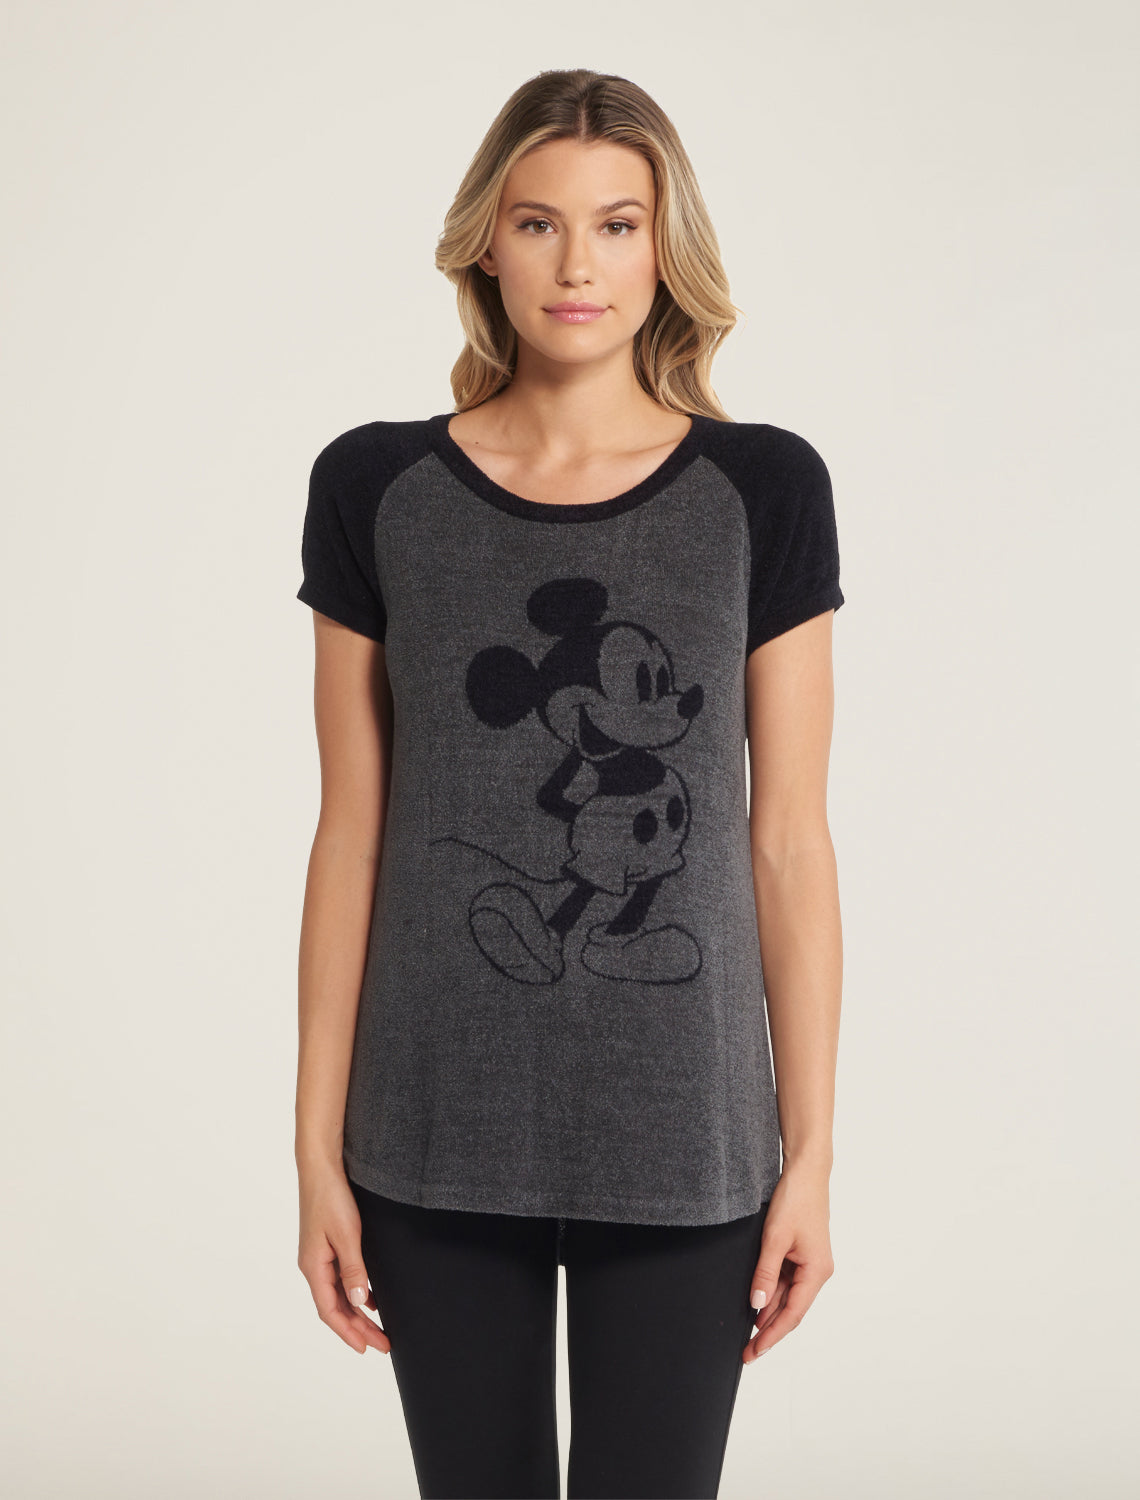 Disney Shirt for Women - Classic Mickey Mouse V-Neck - Red-A